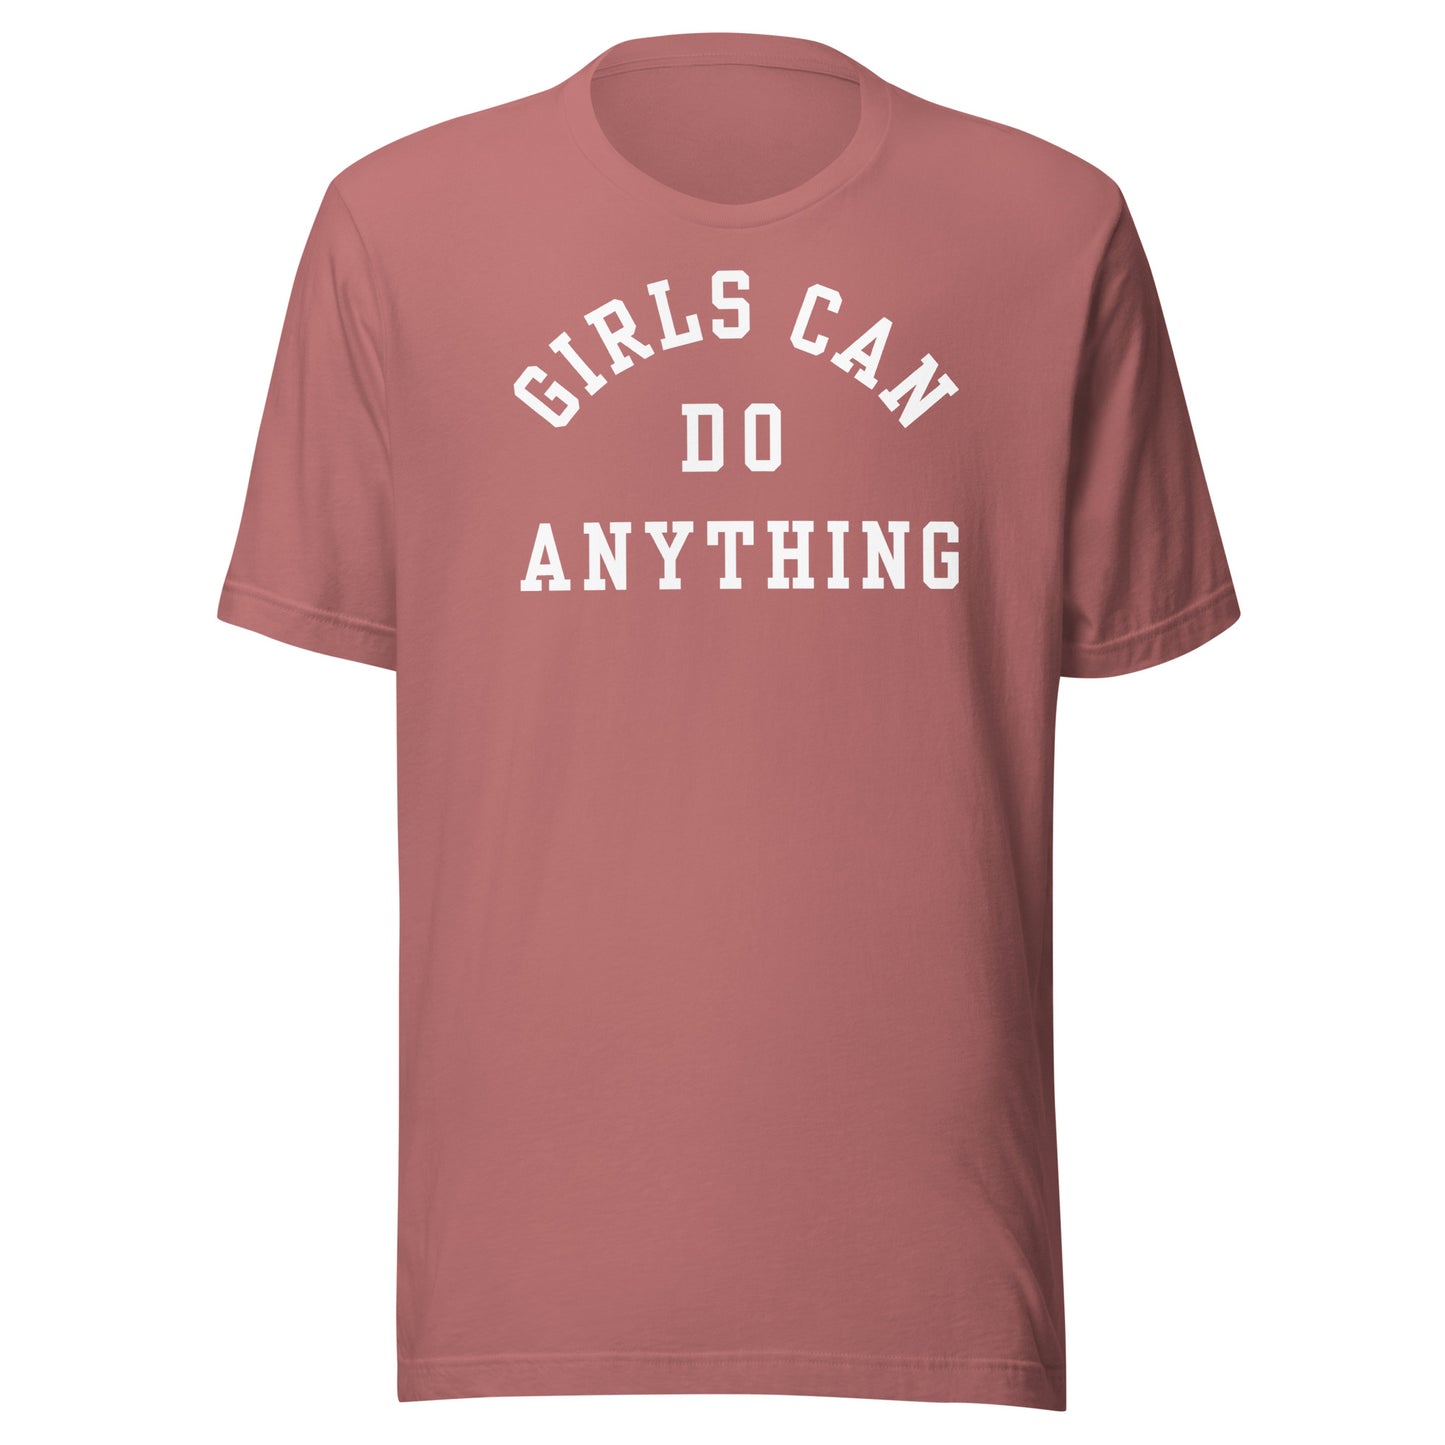 Girls Can Do Anything Tee